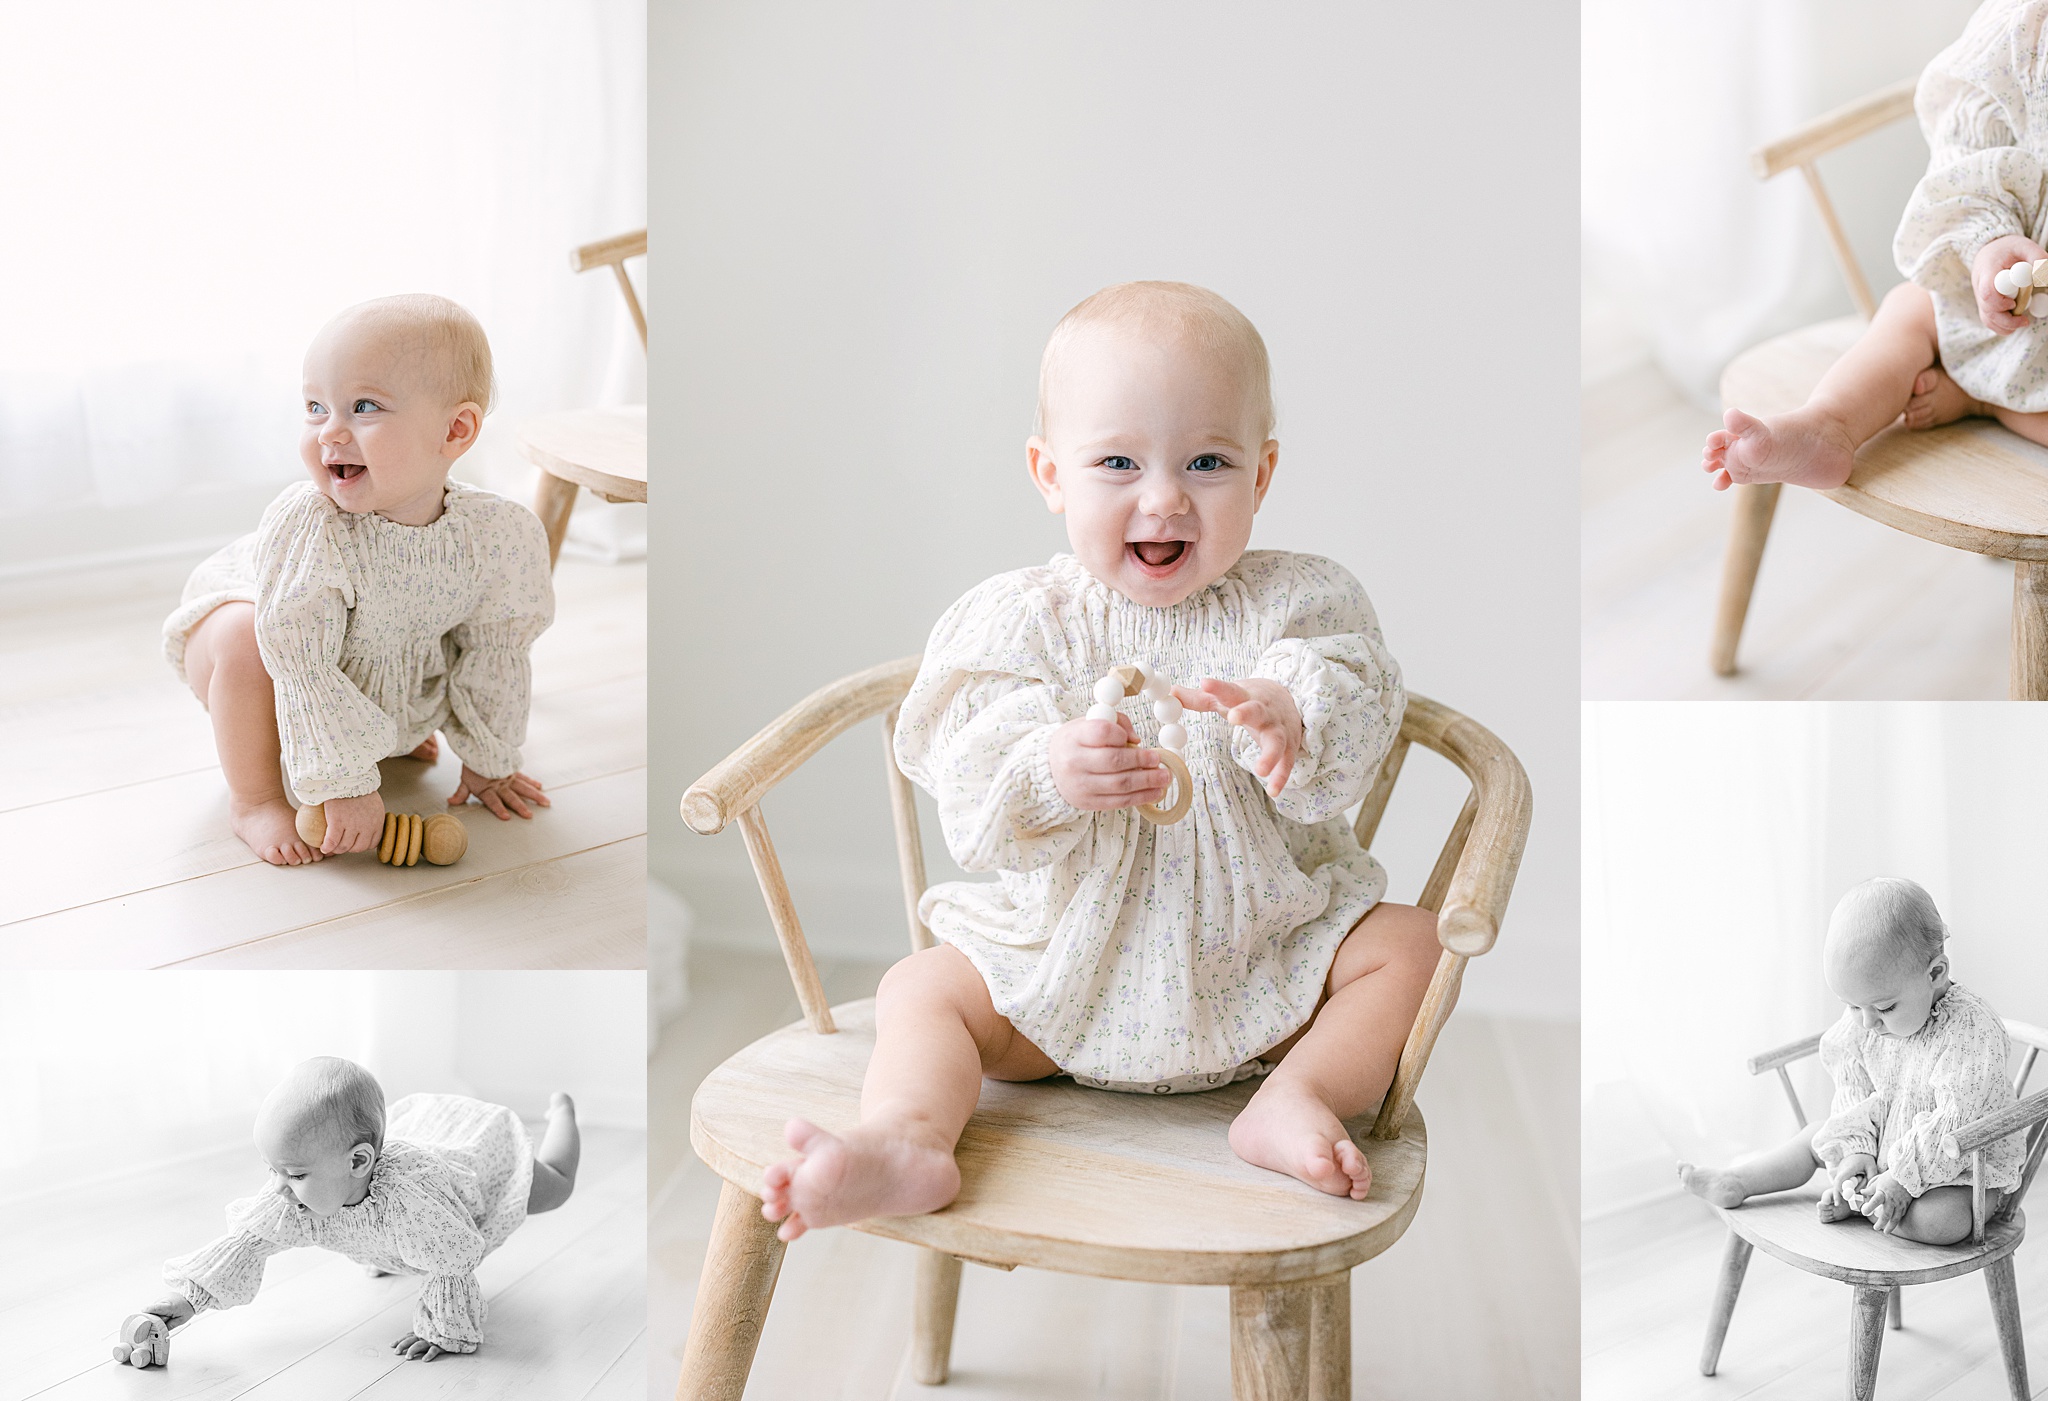 Northern Virginia Baby Photographer One Year Session Danielle Hobbs Photography 1787